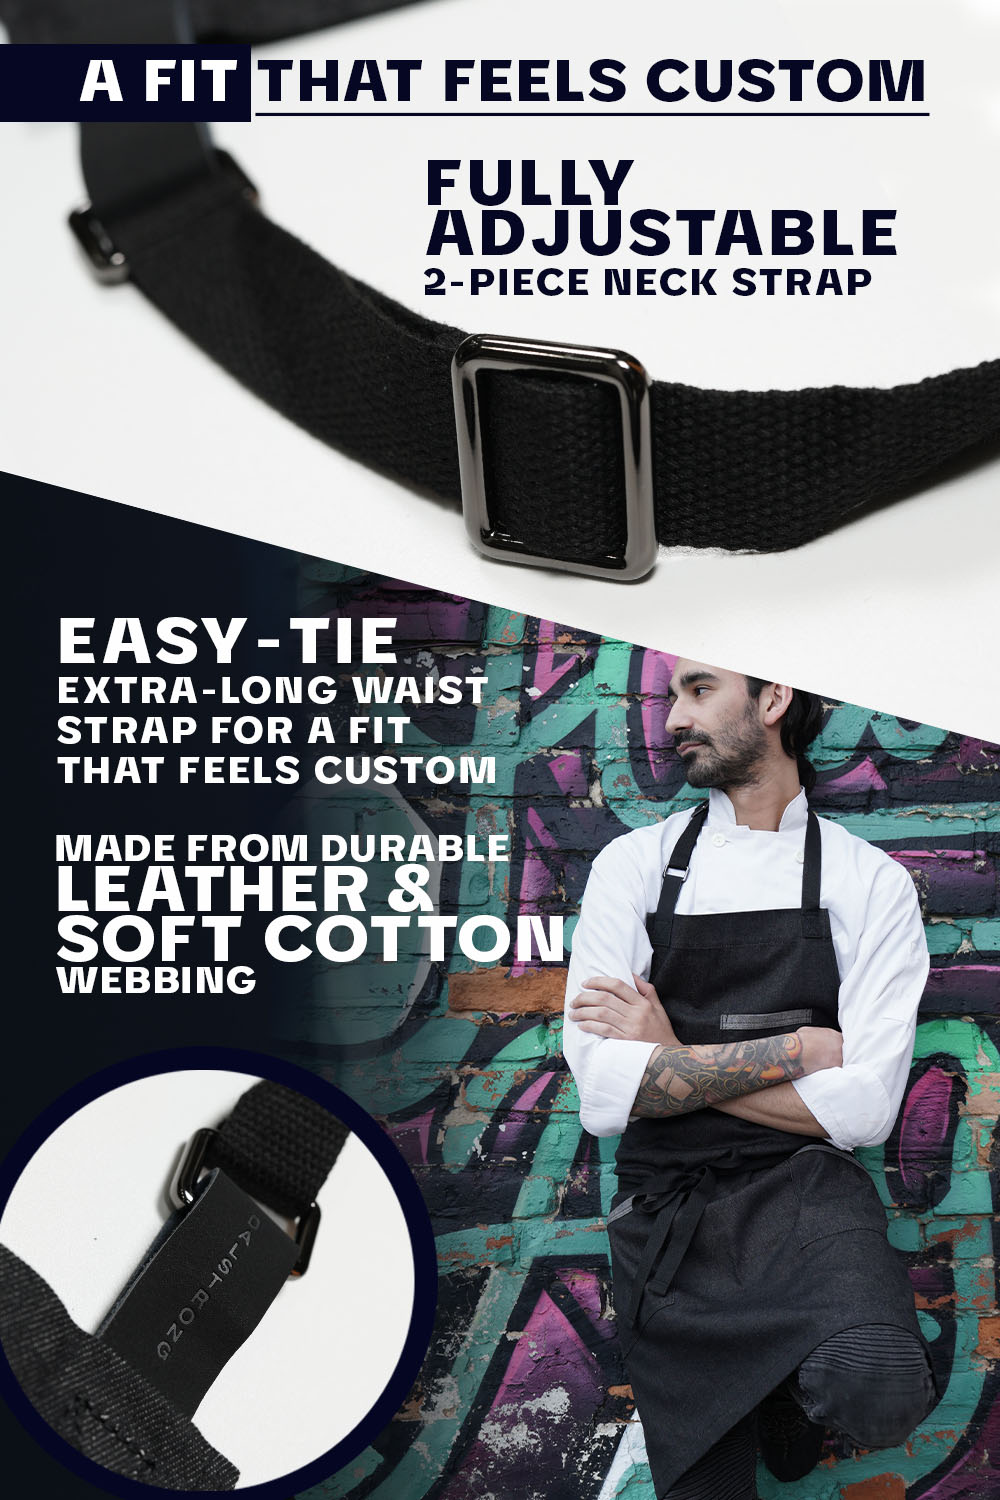 Dalstrong the night rider professional chef's kitchen apron featuring it's leather and soft cotton strap.